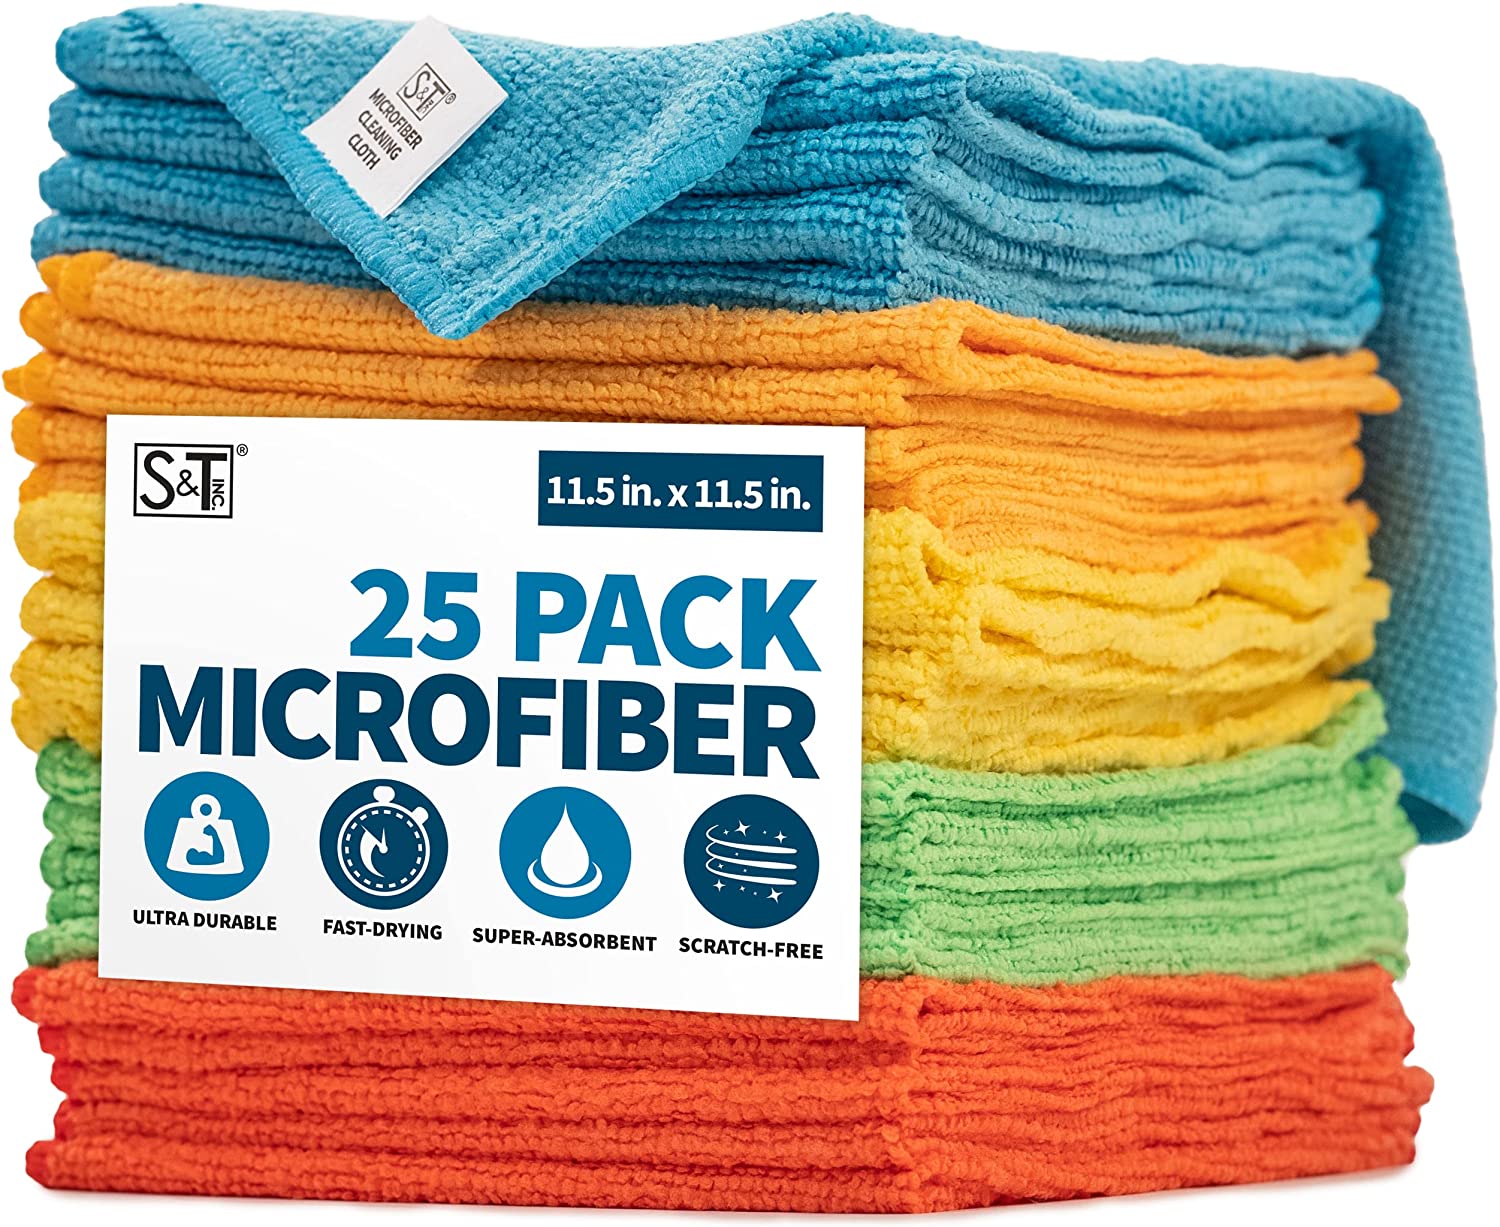 S&T INC. Fast-Drying Microfiber Cleaning Cloths, 25-Pack